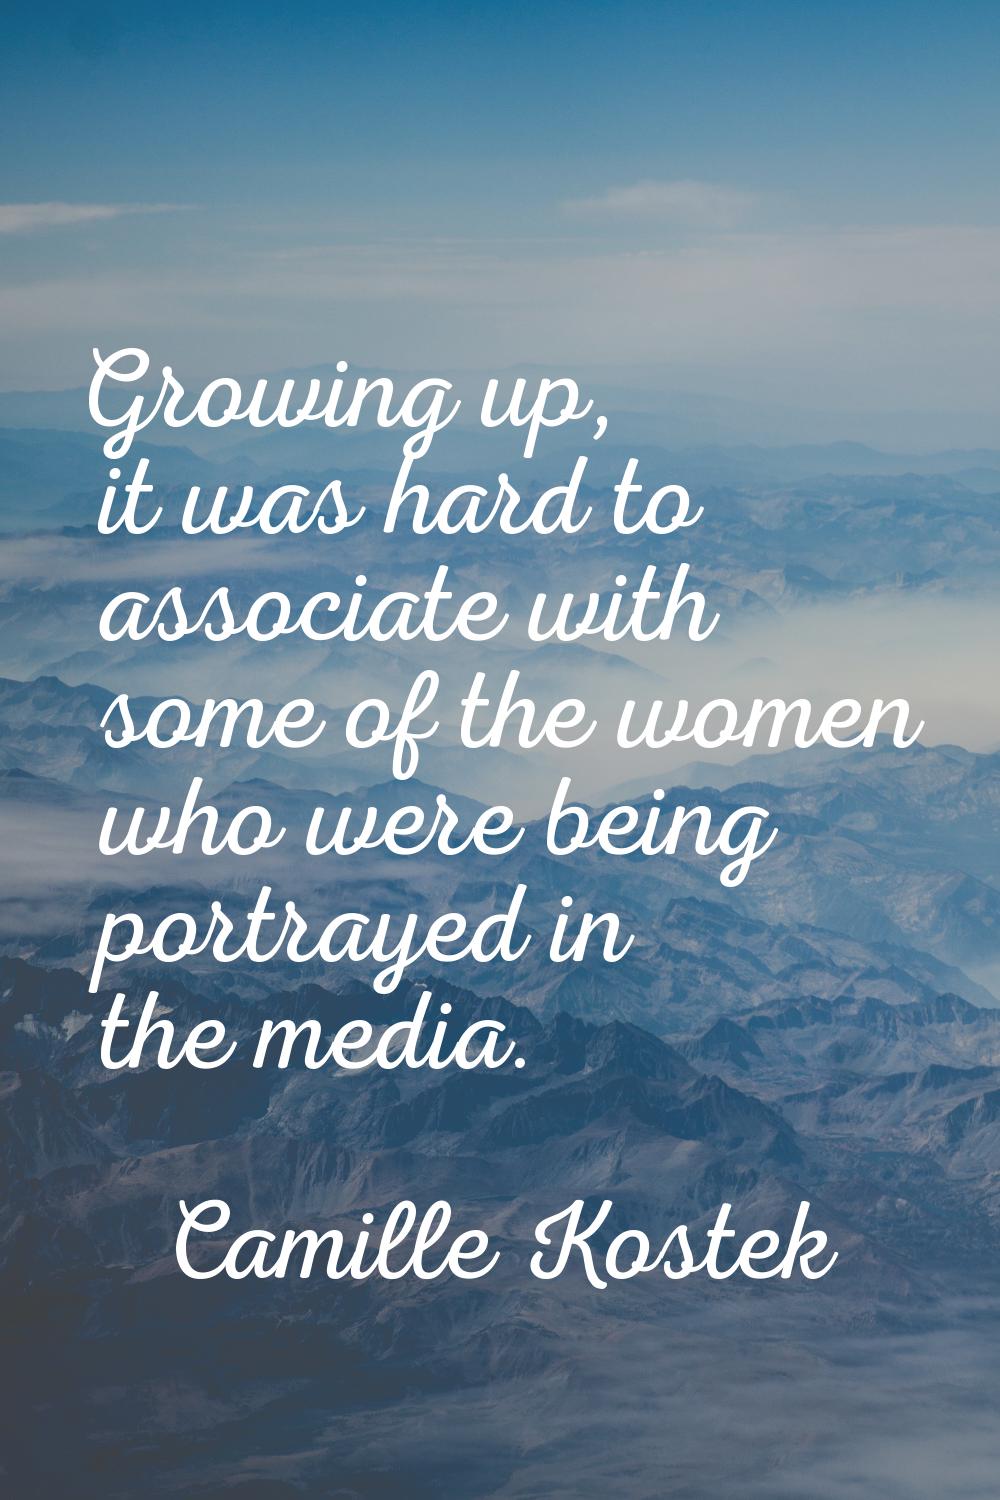 Growing up, it was hard to associate with some of the women who were being portrayed in the media.